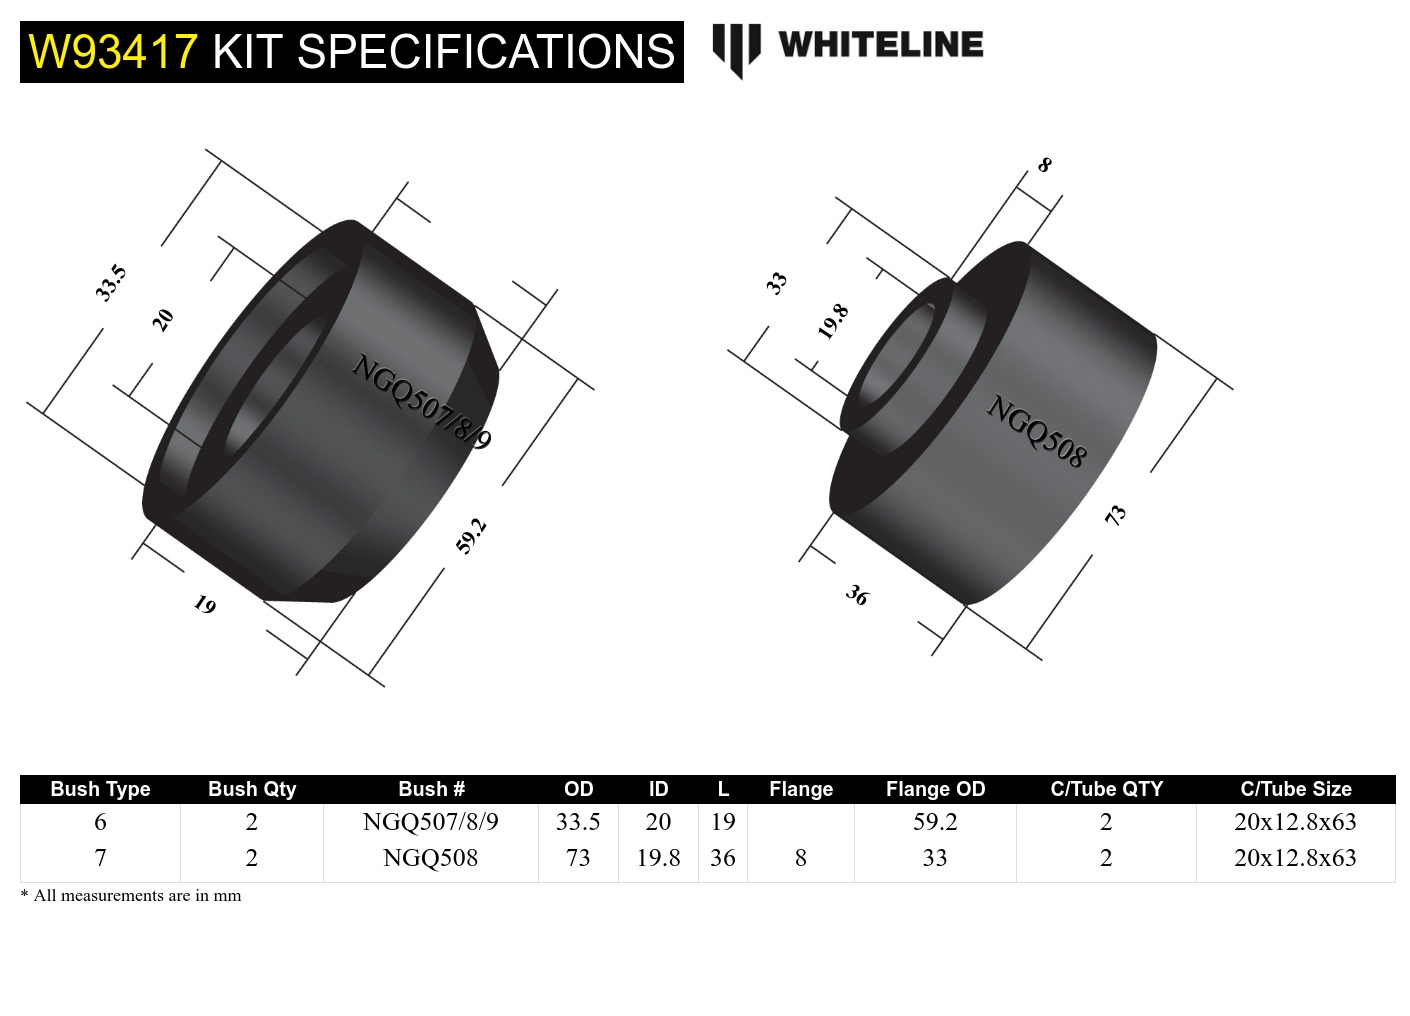 Kit Specifications Image